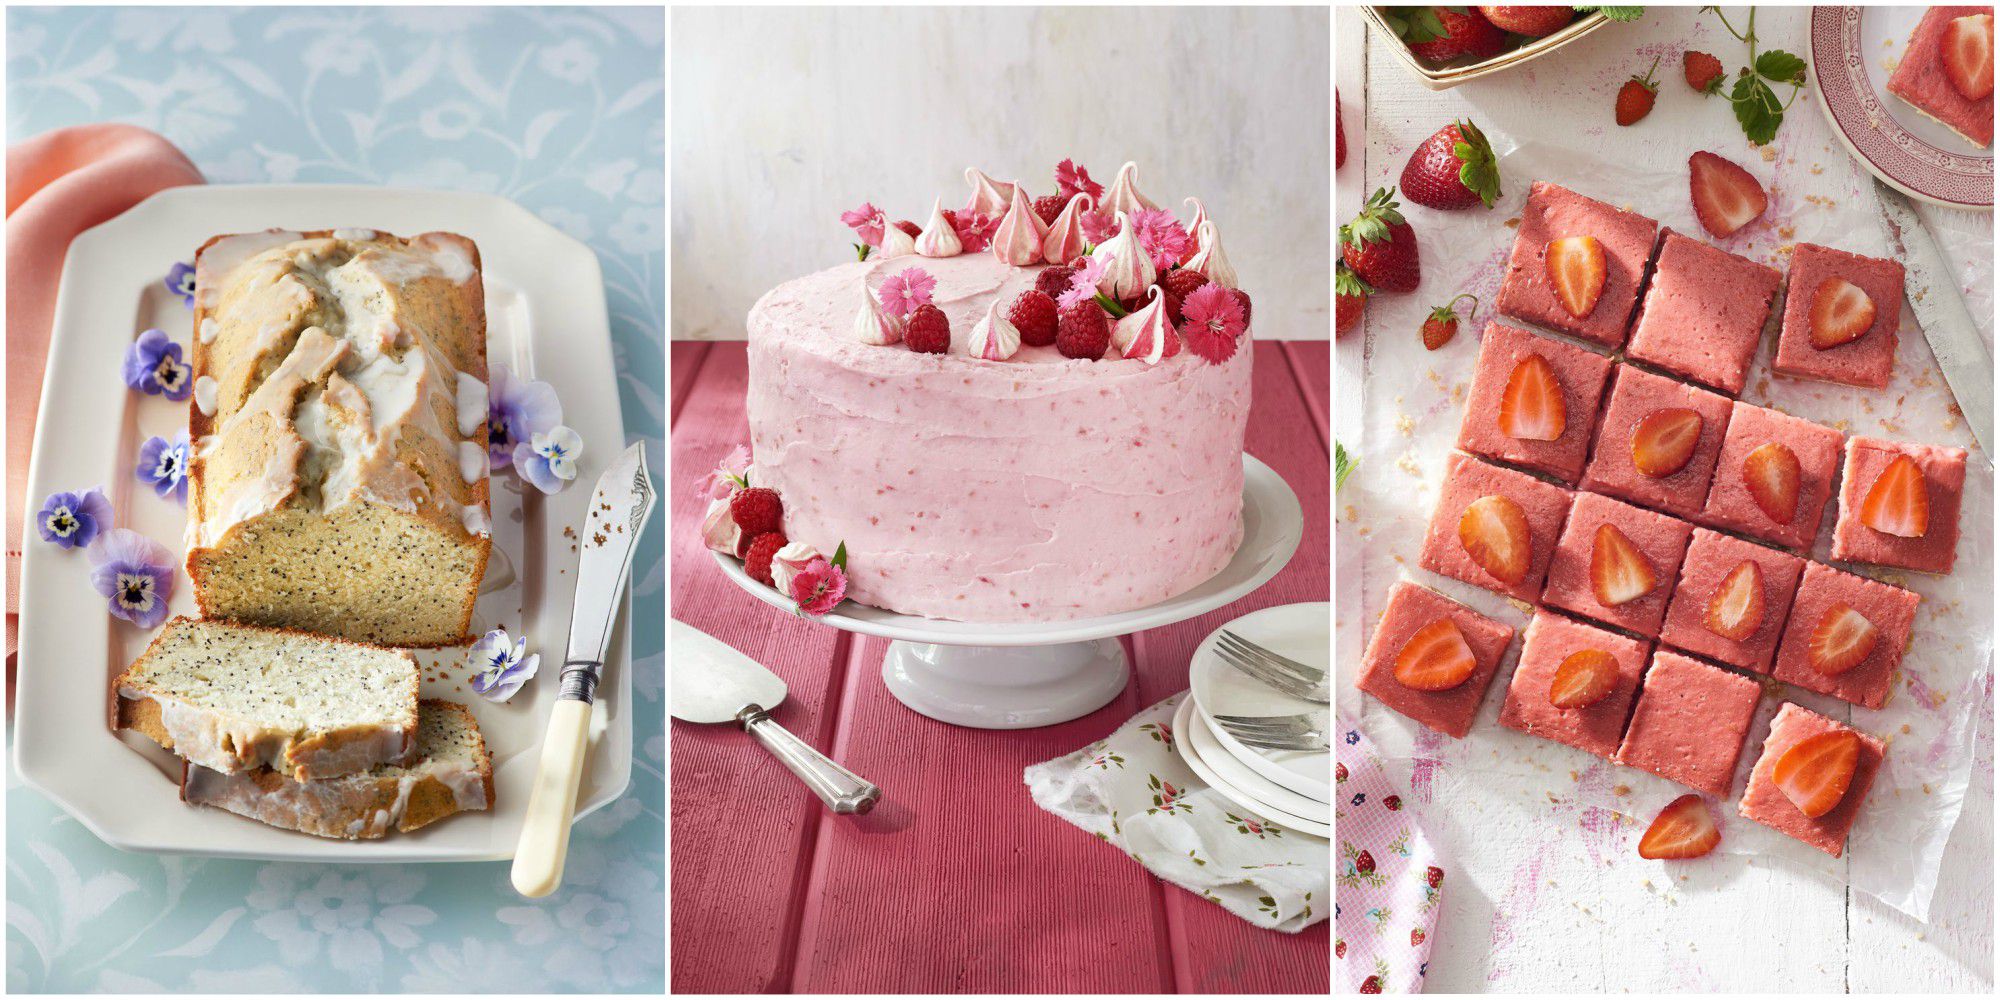 20 Best Mother's Day Desserts - Easy Ideas for Mothers Day Dessert ...